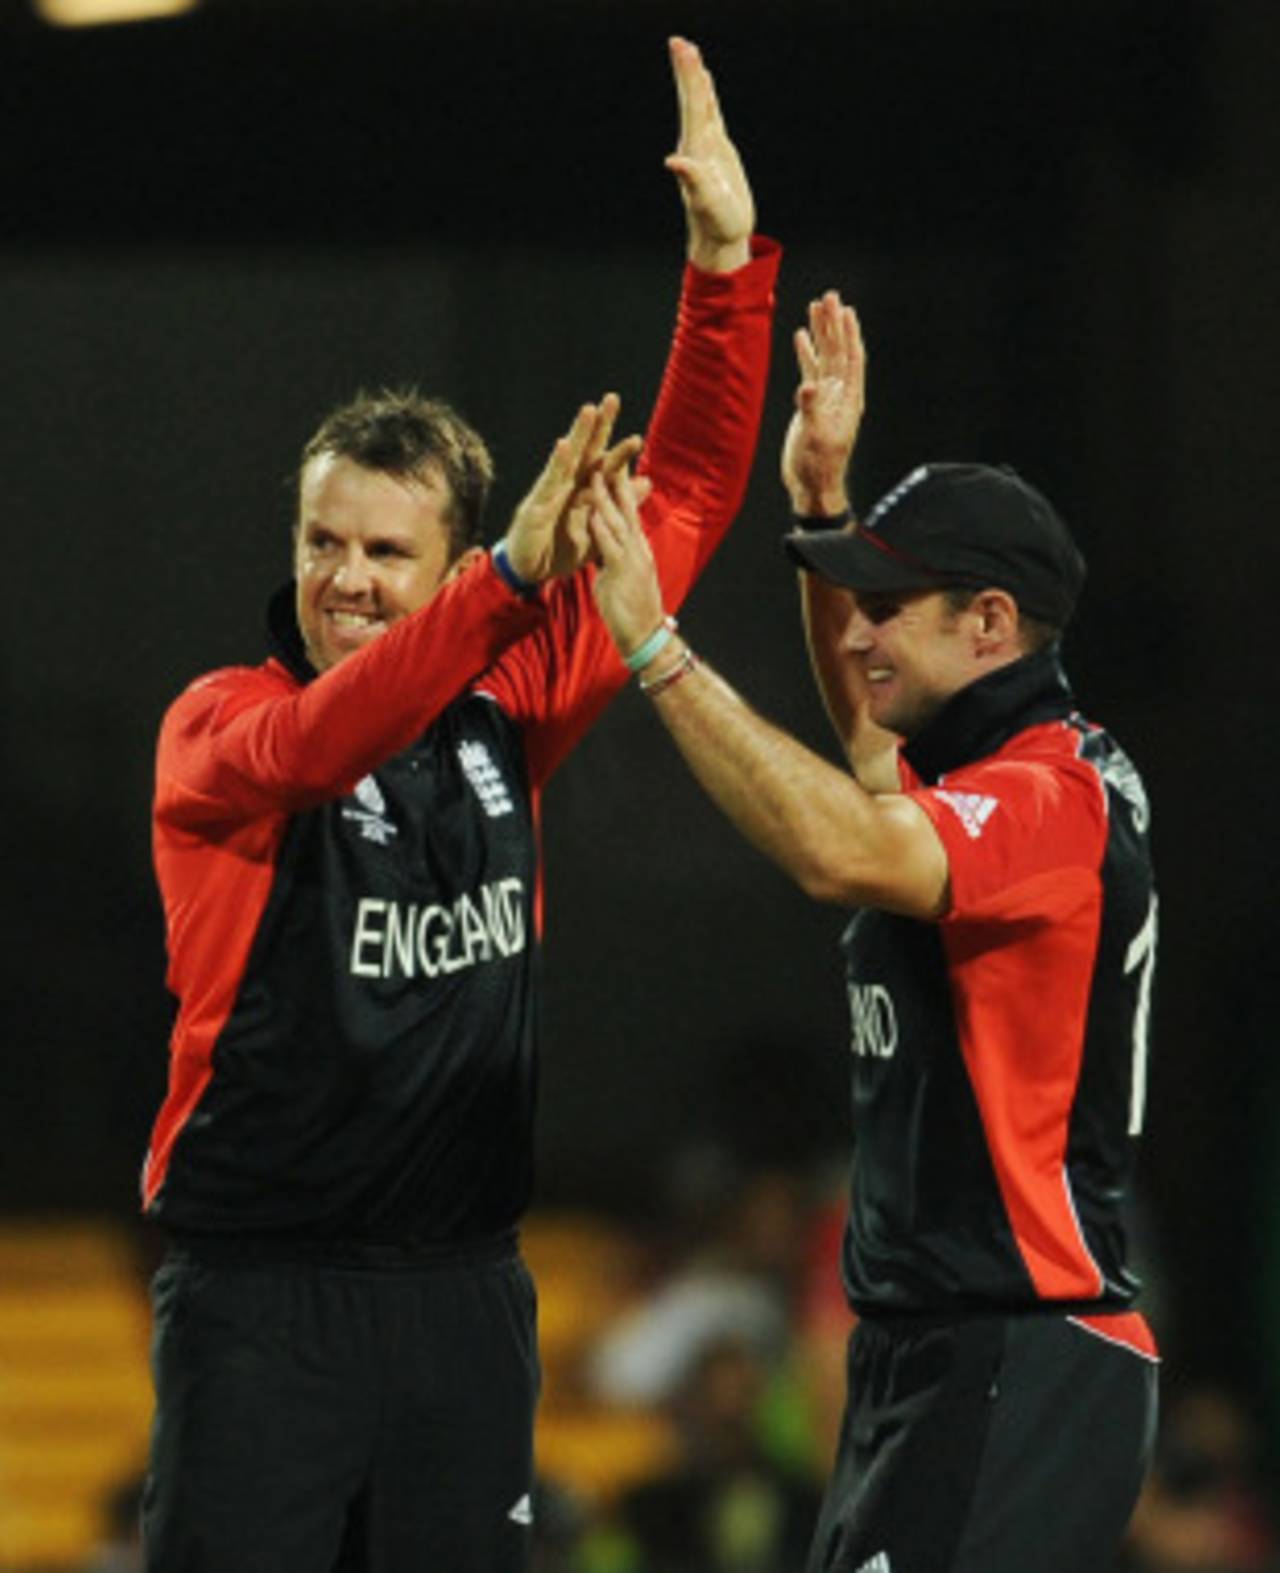 Graeme Swann claimed three wickets for England, but it was not enough to force victory&nbsp;&nbsp;&bull;&nbsp;&nbsp;Getty Images